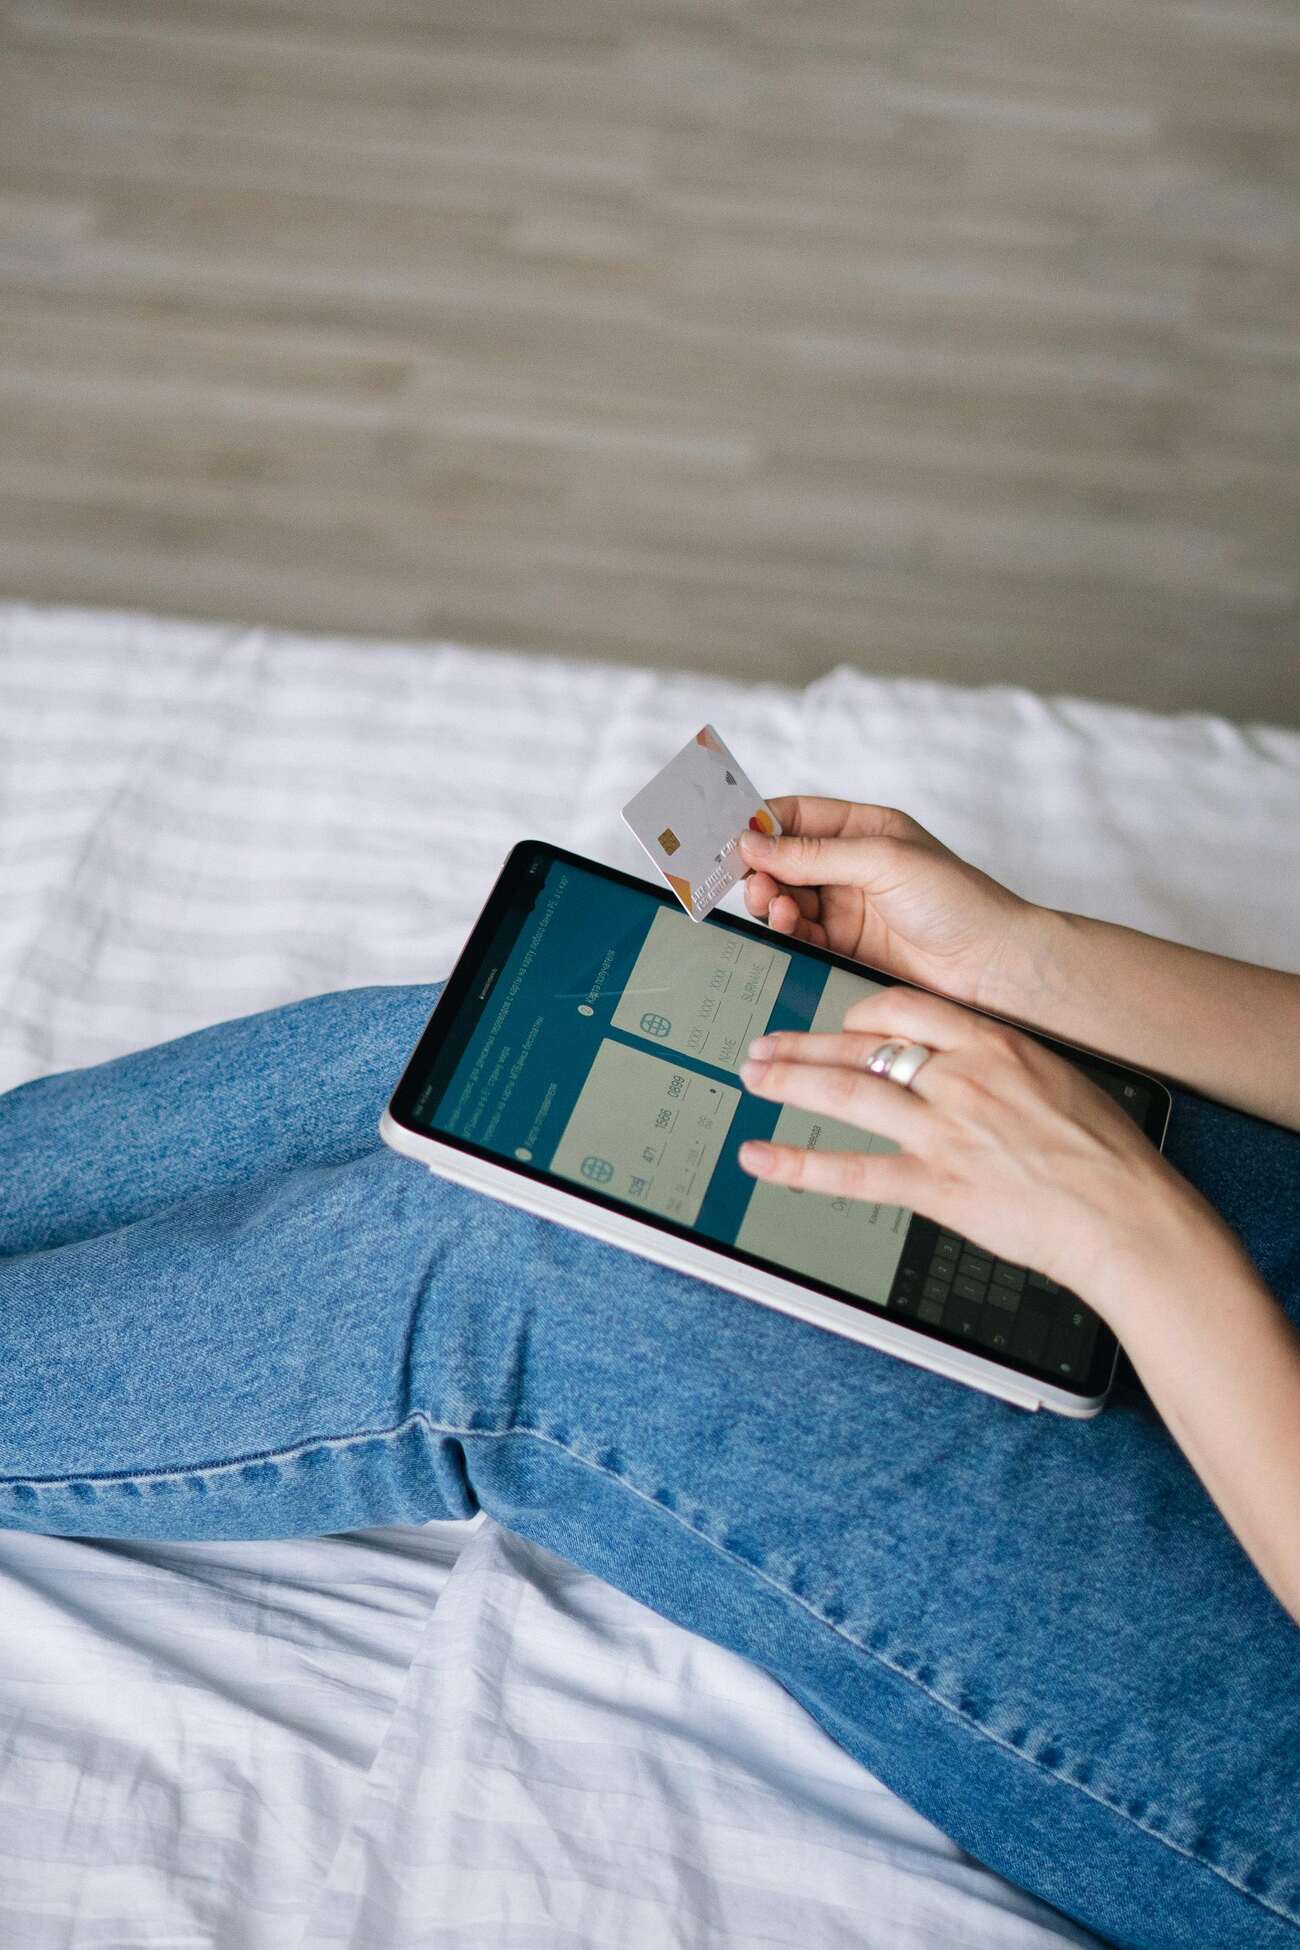 A person holding a credit card while using a tablet on a bed